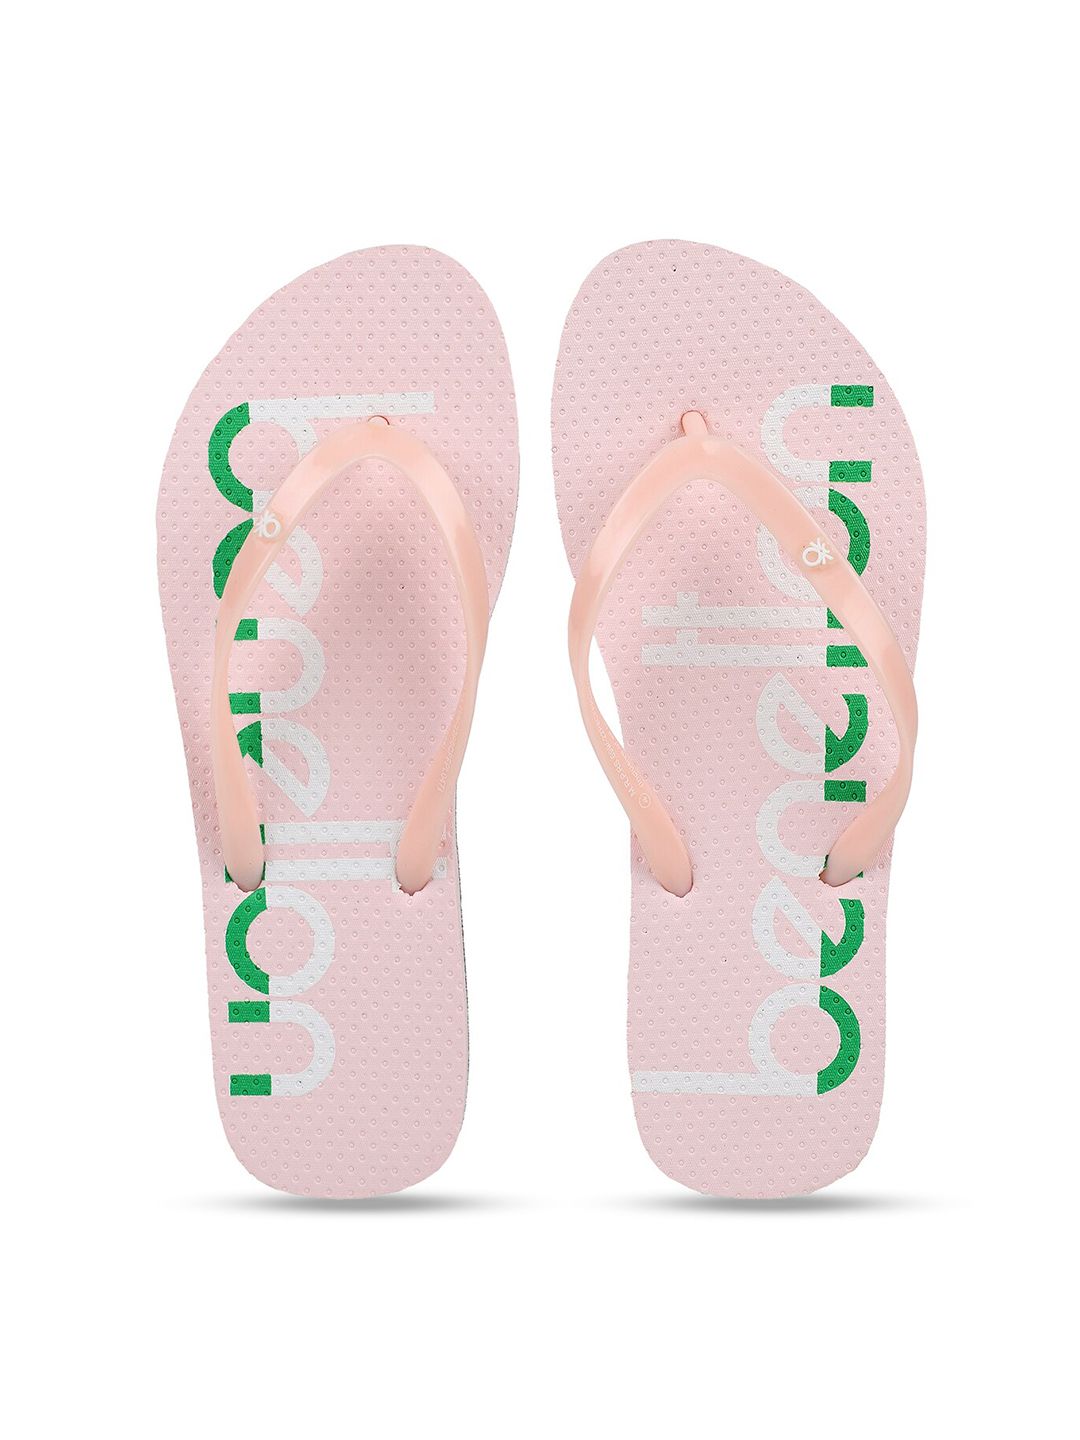 United Colors of Benetton Women Pink & Green Printed Rubber Thong Flip-Flops Price in India